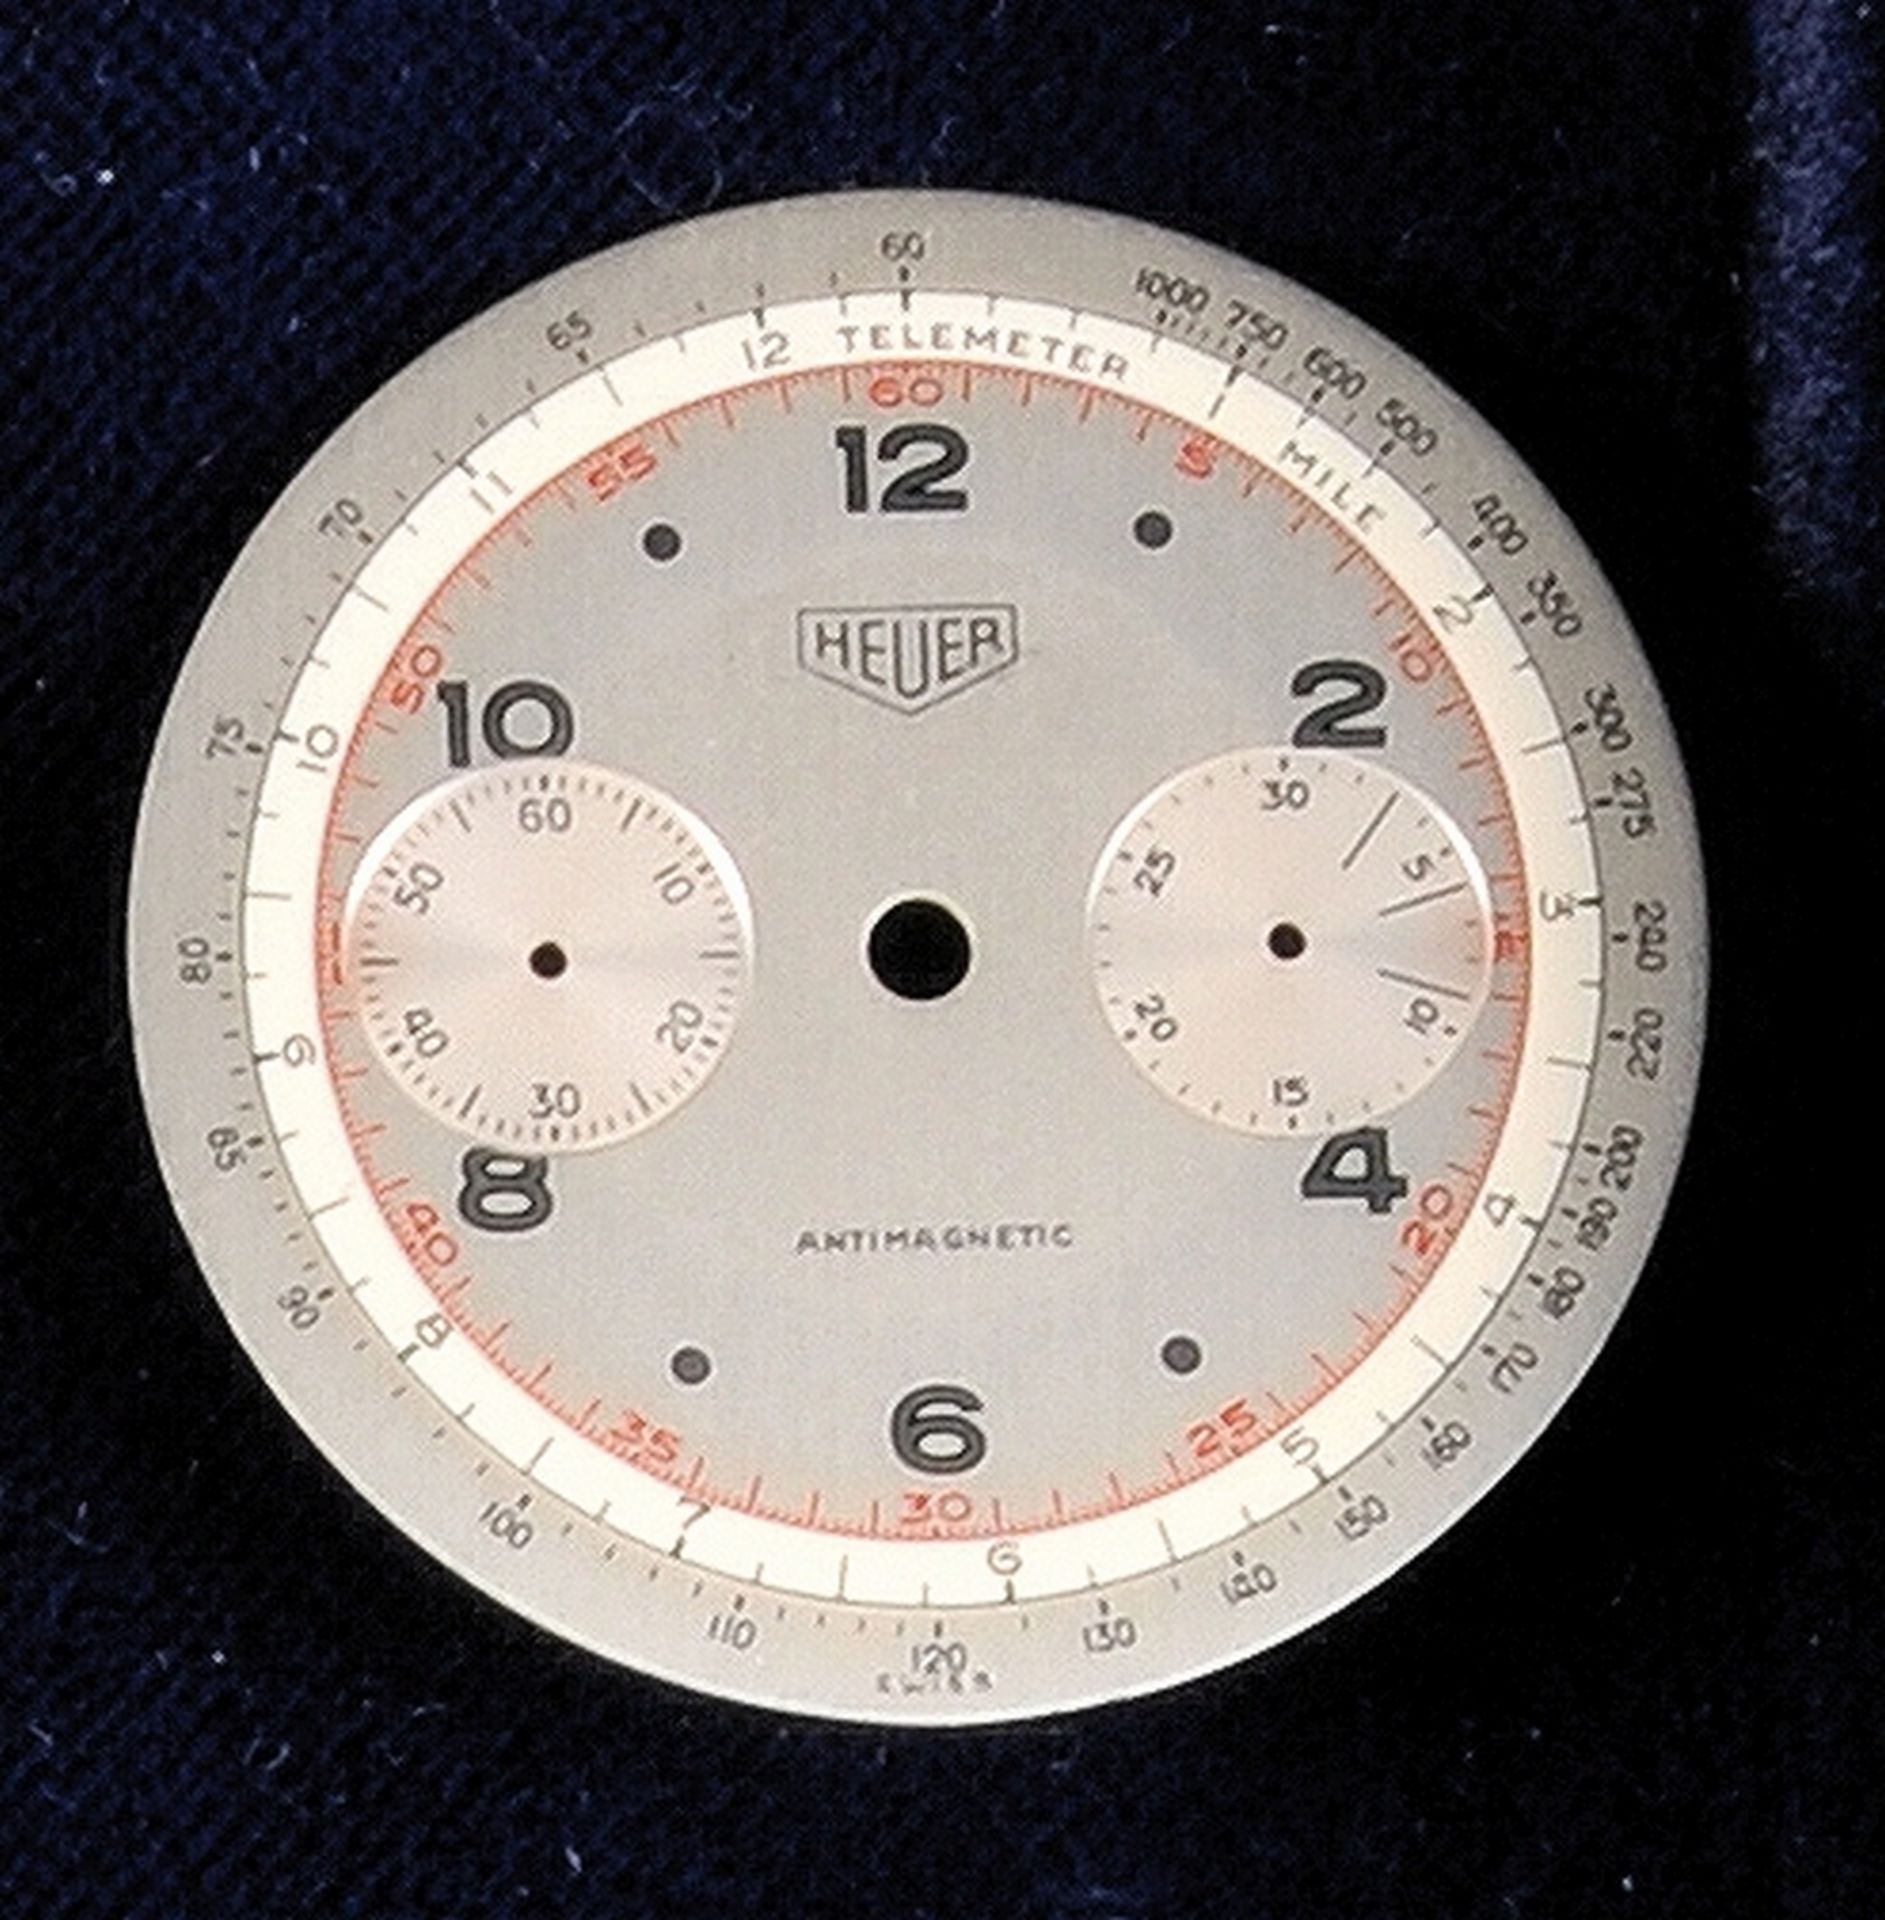 Heuer Antimagnetic, silver-plated dial with tachymeter and Telemeter Scale,